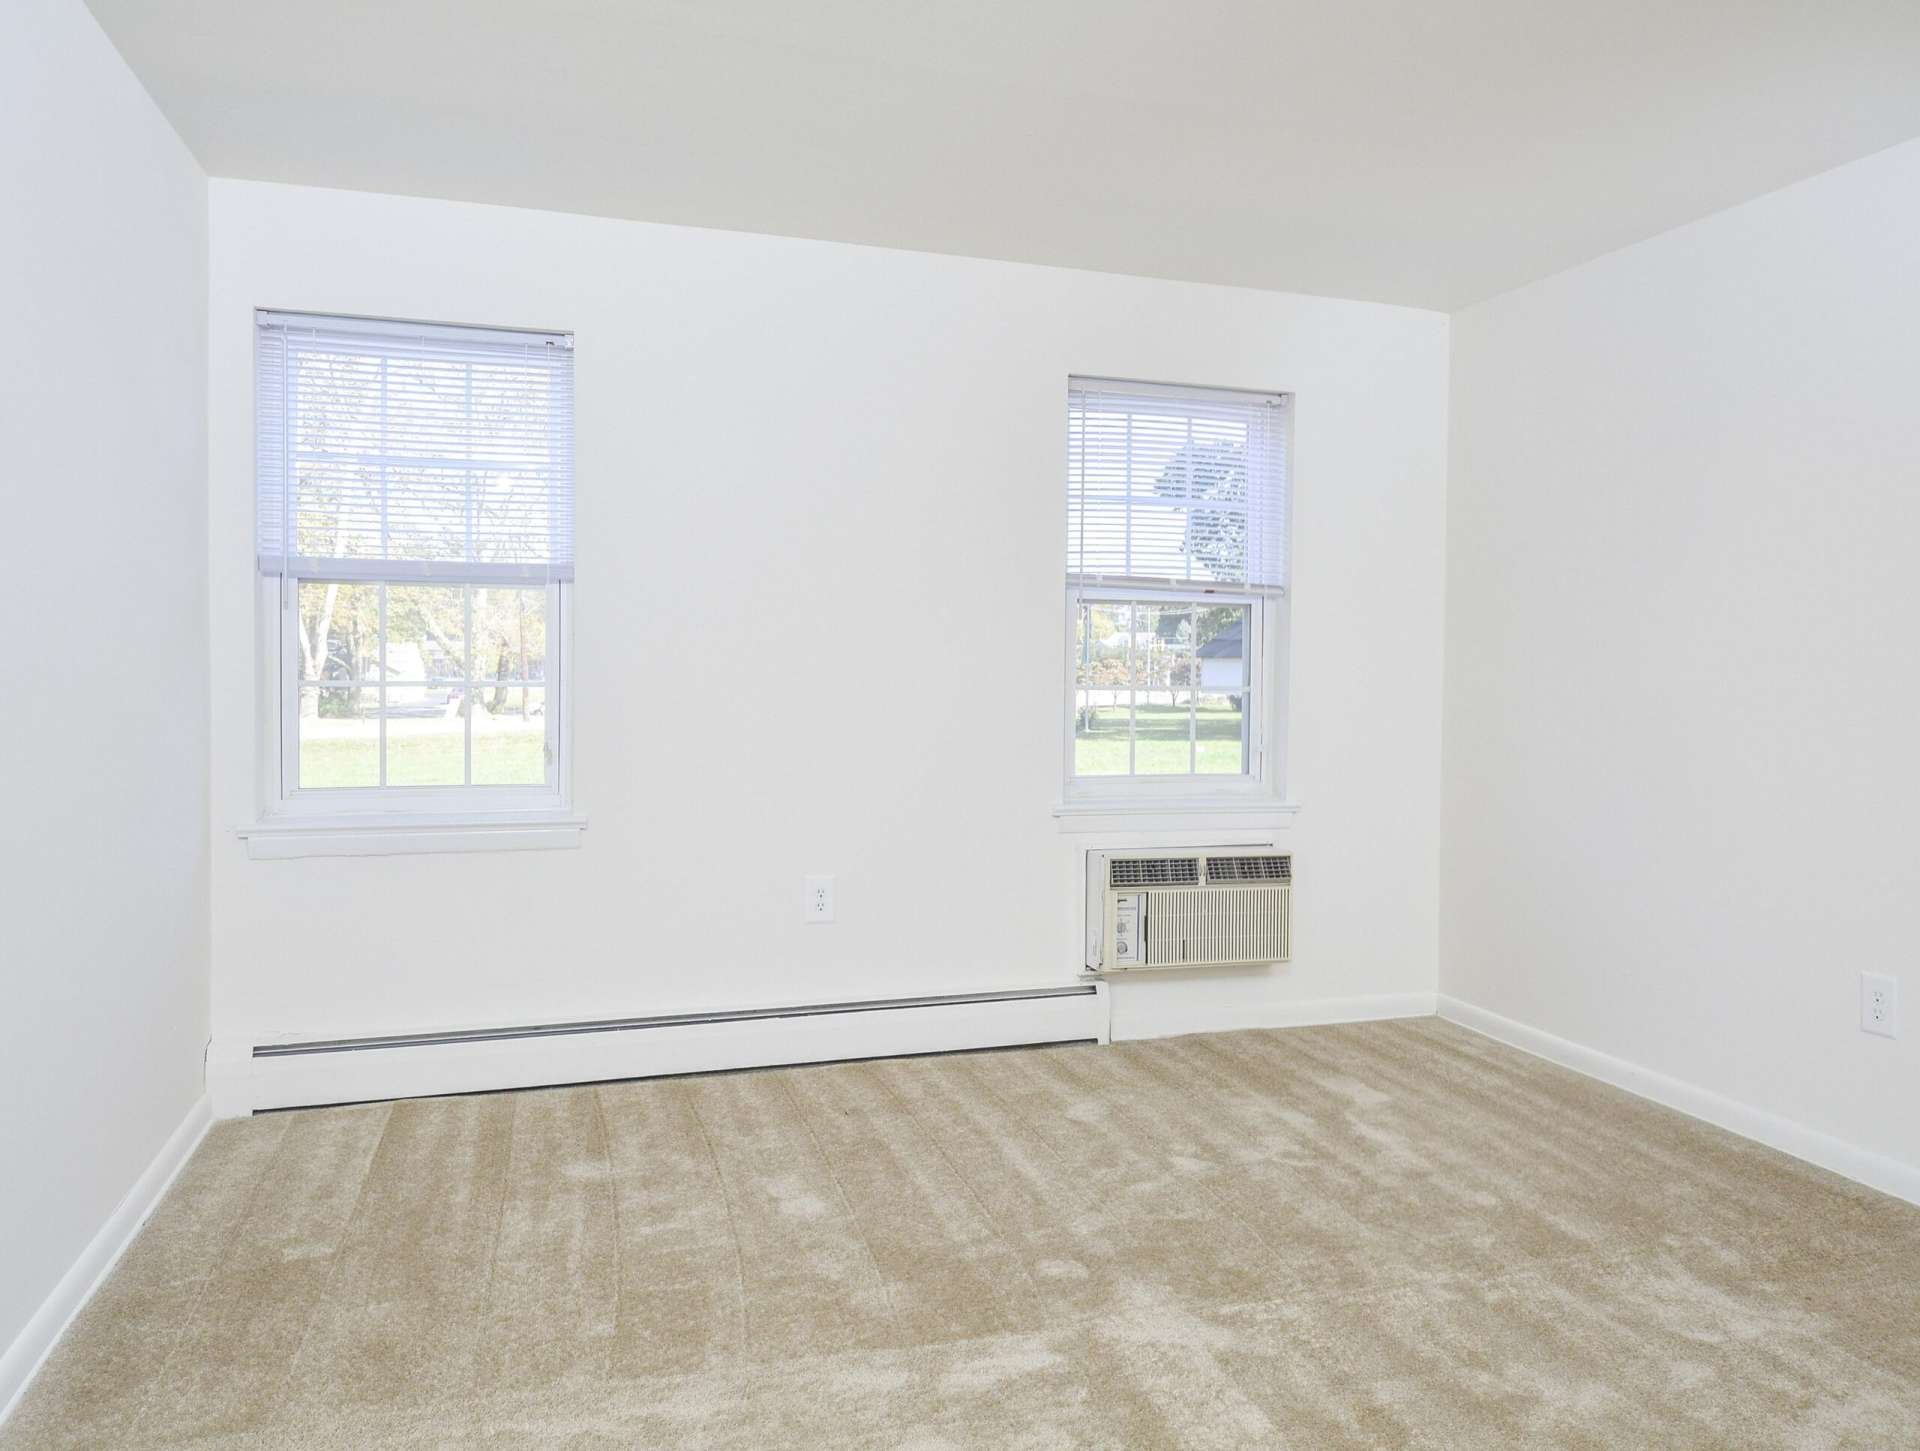 Bedroom with beige carpets and 2 windows at Knollwood Apartments.